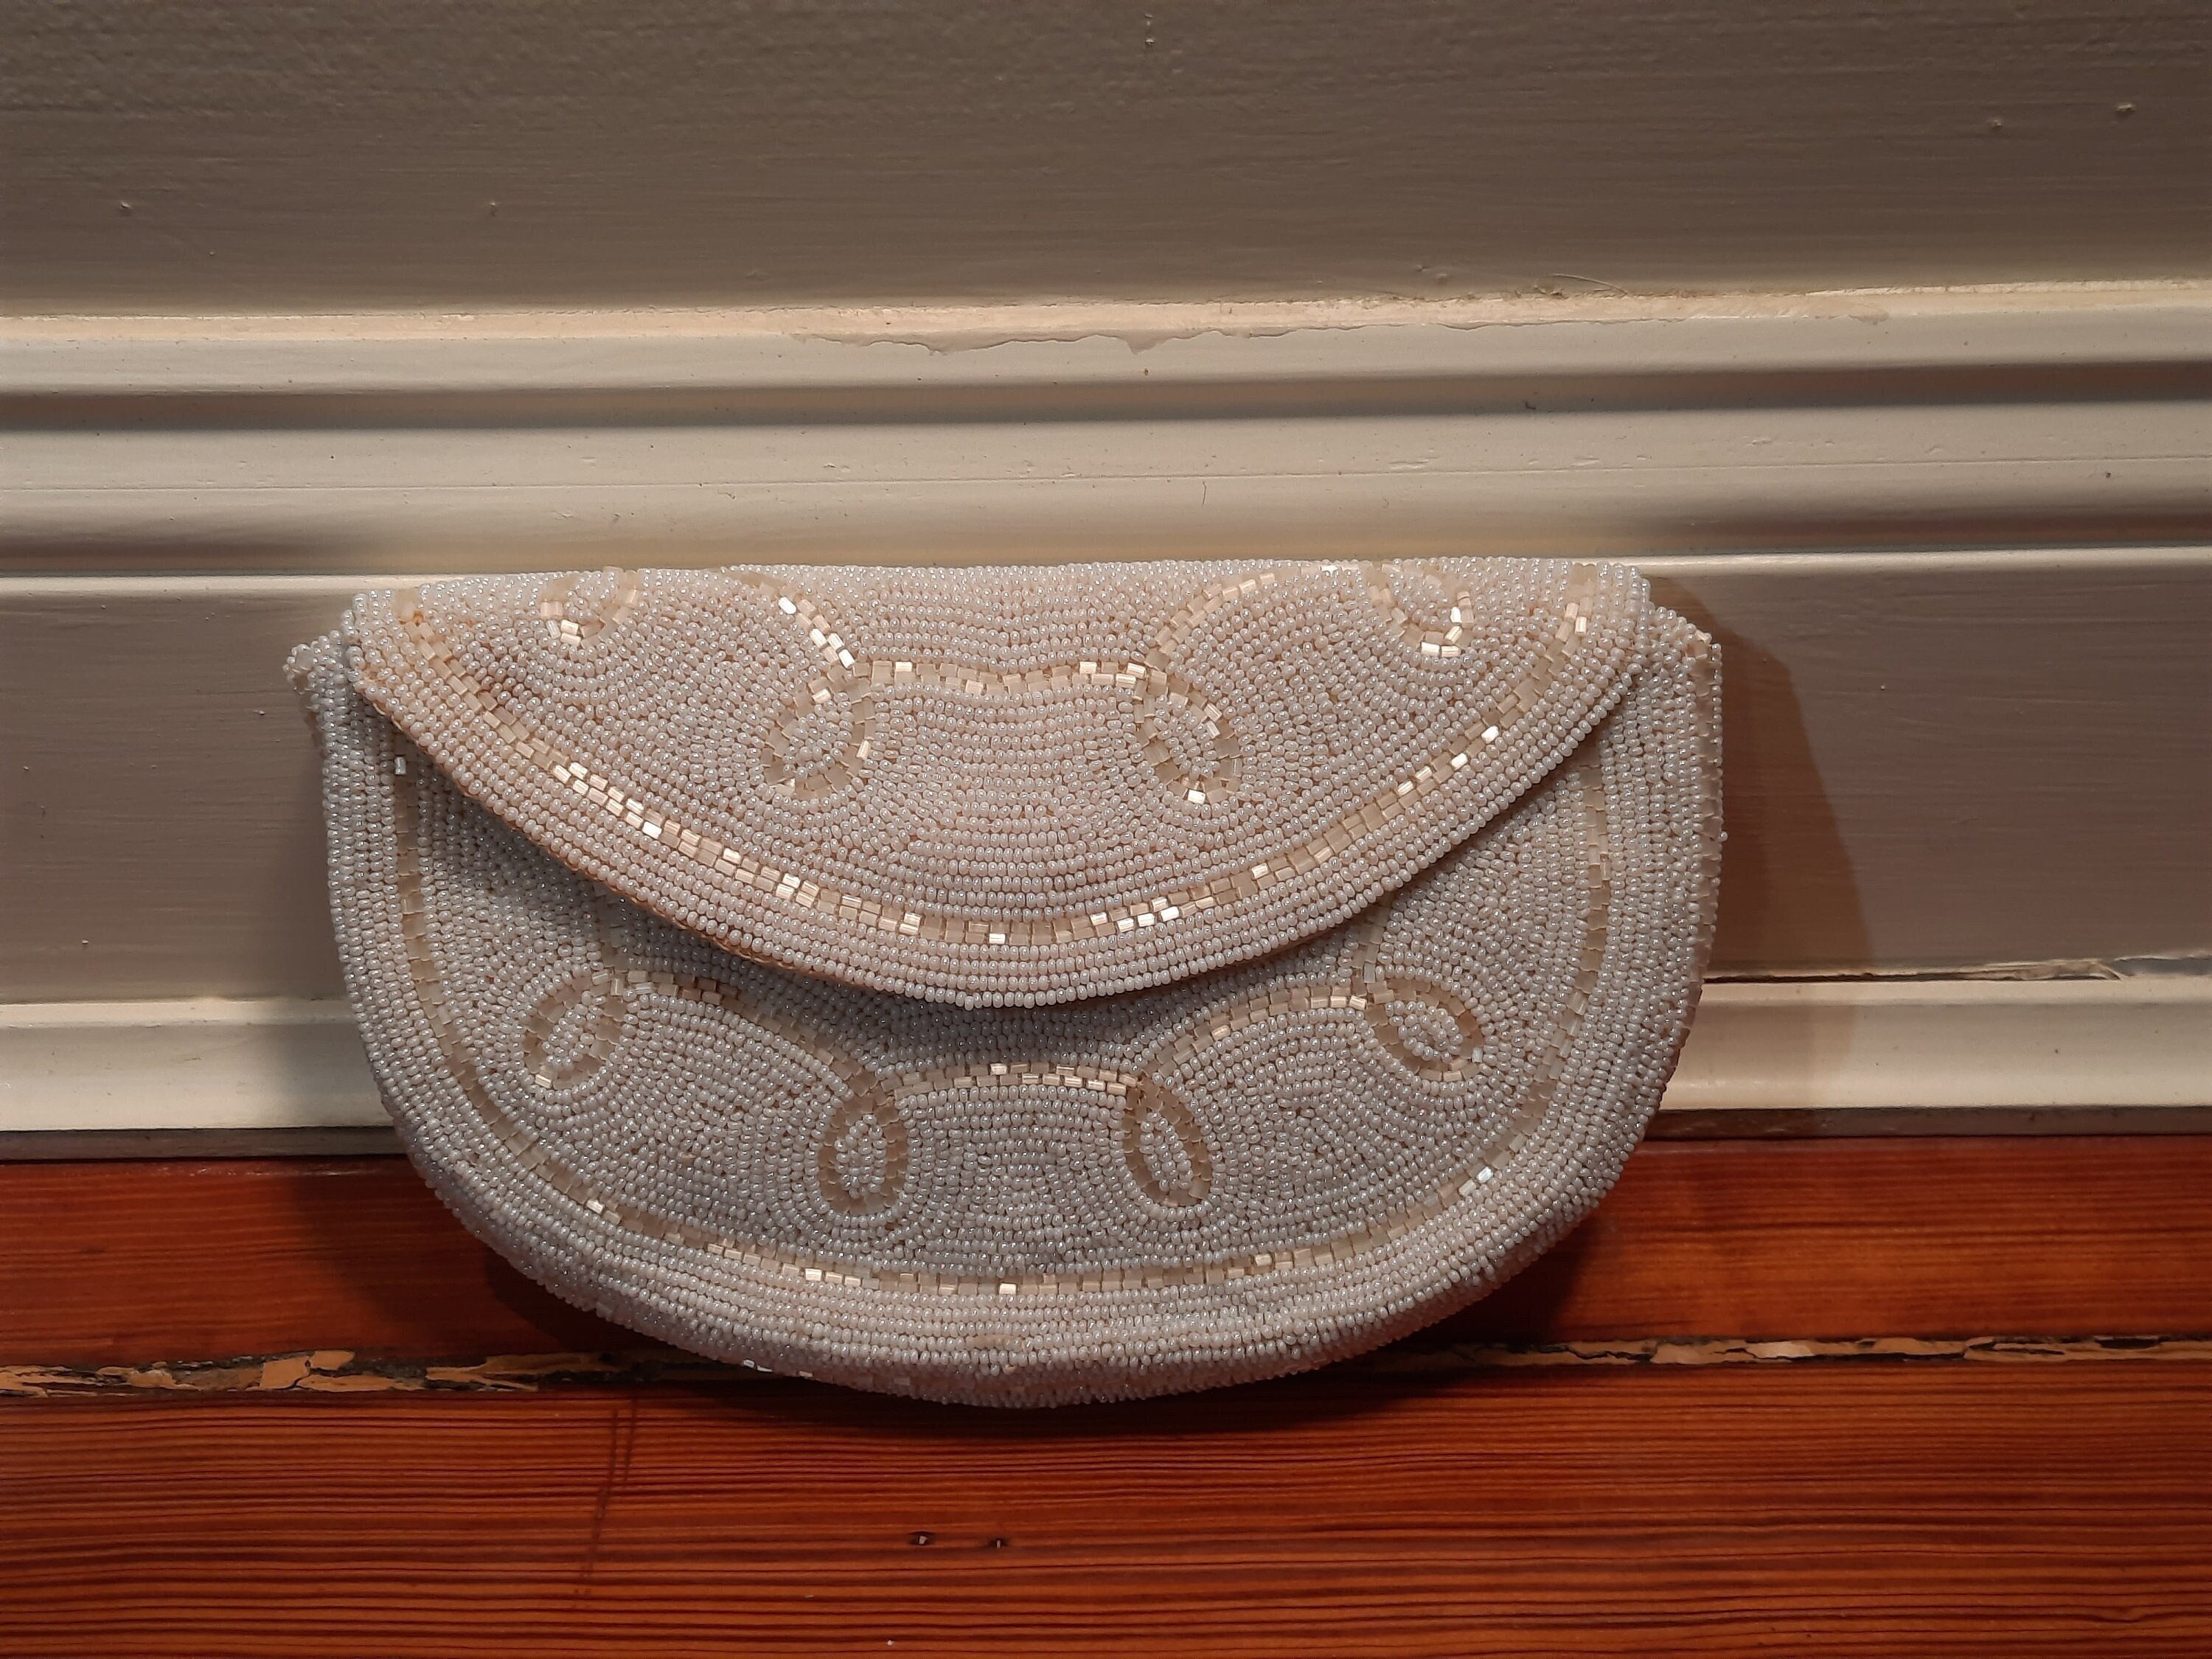 VINTAGE Hand Made in FRANCE for Jorelle Bags White Beaded Purse Wedding  Evening